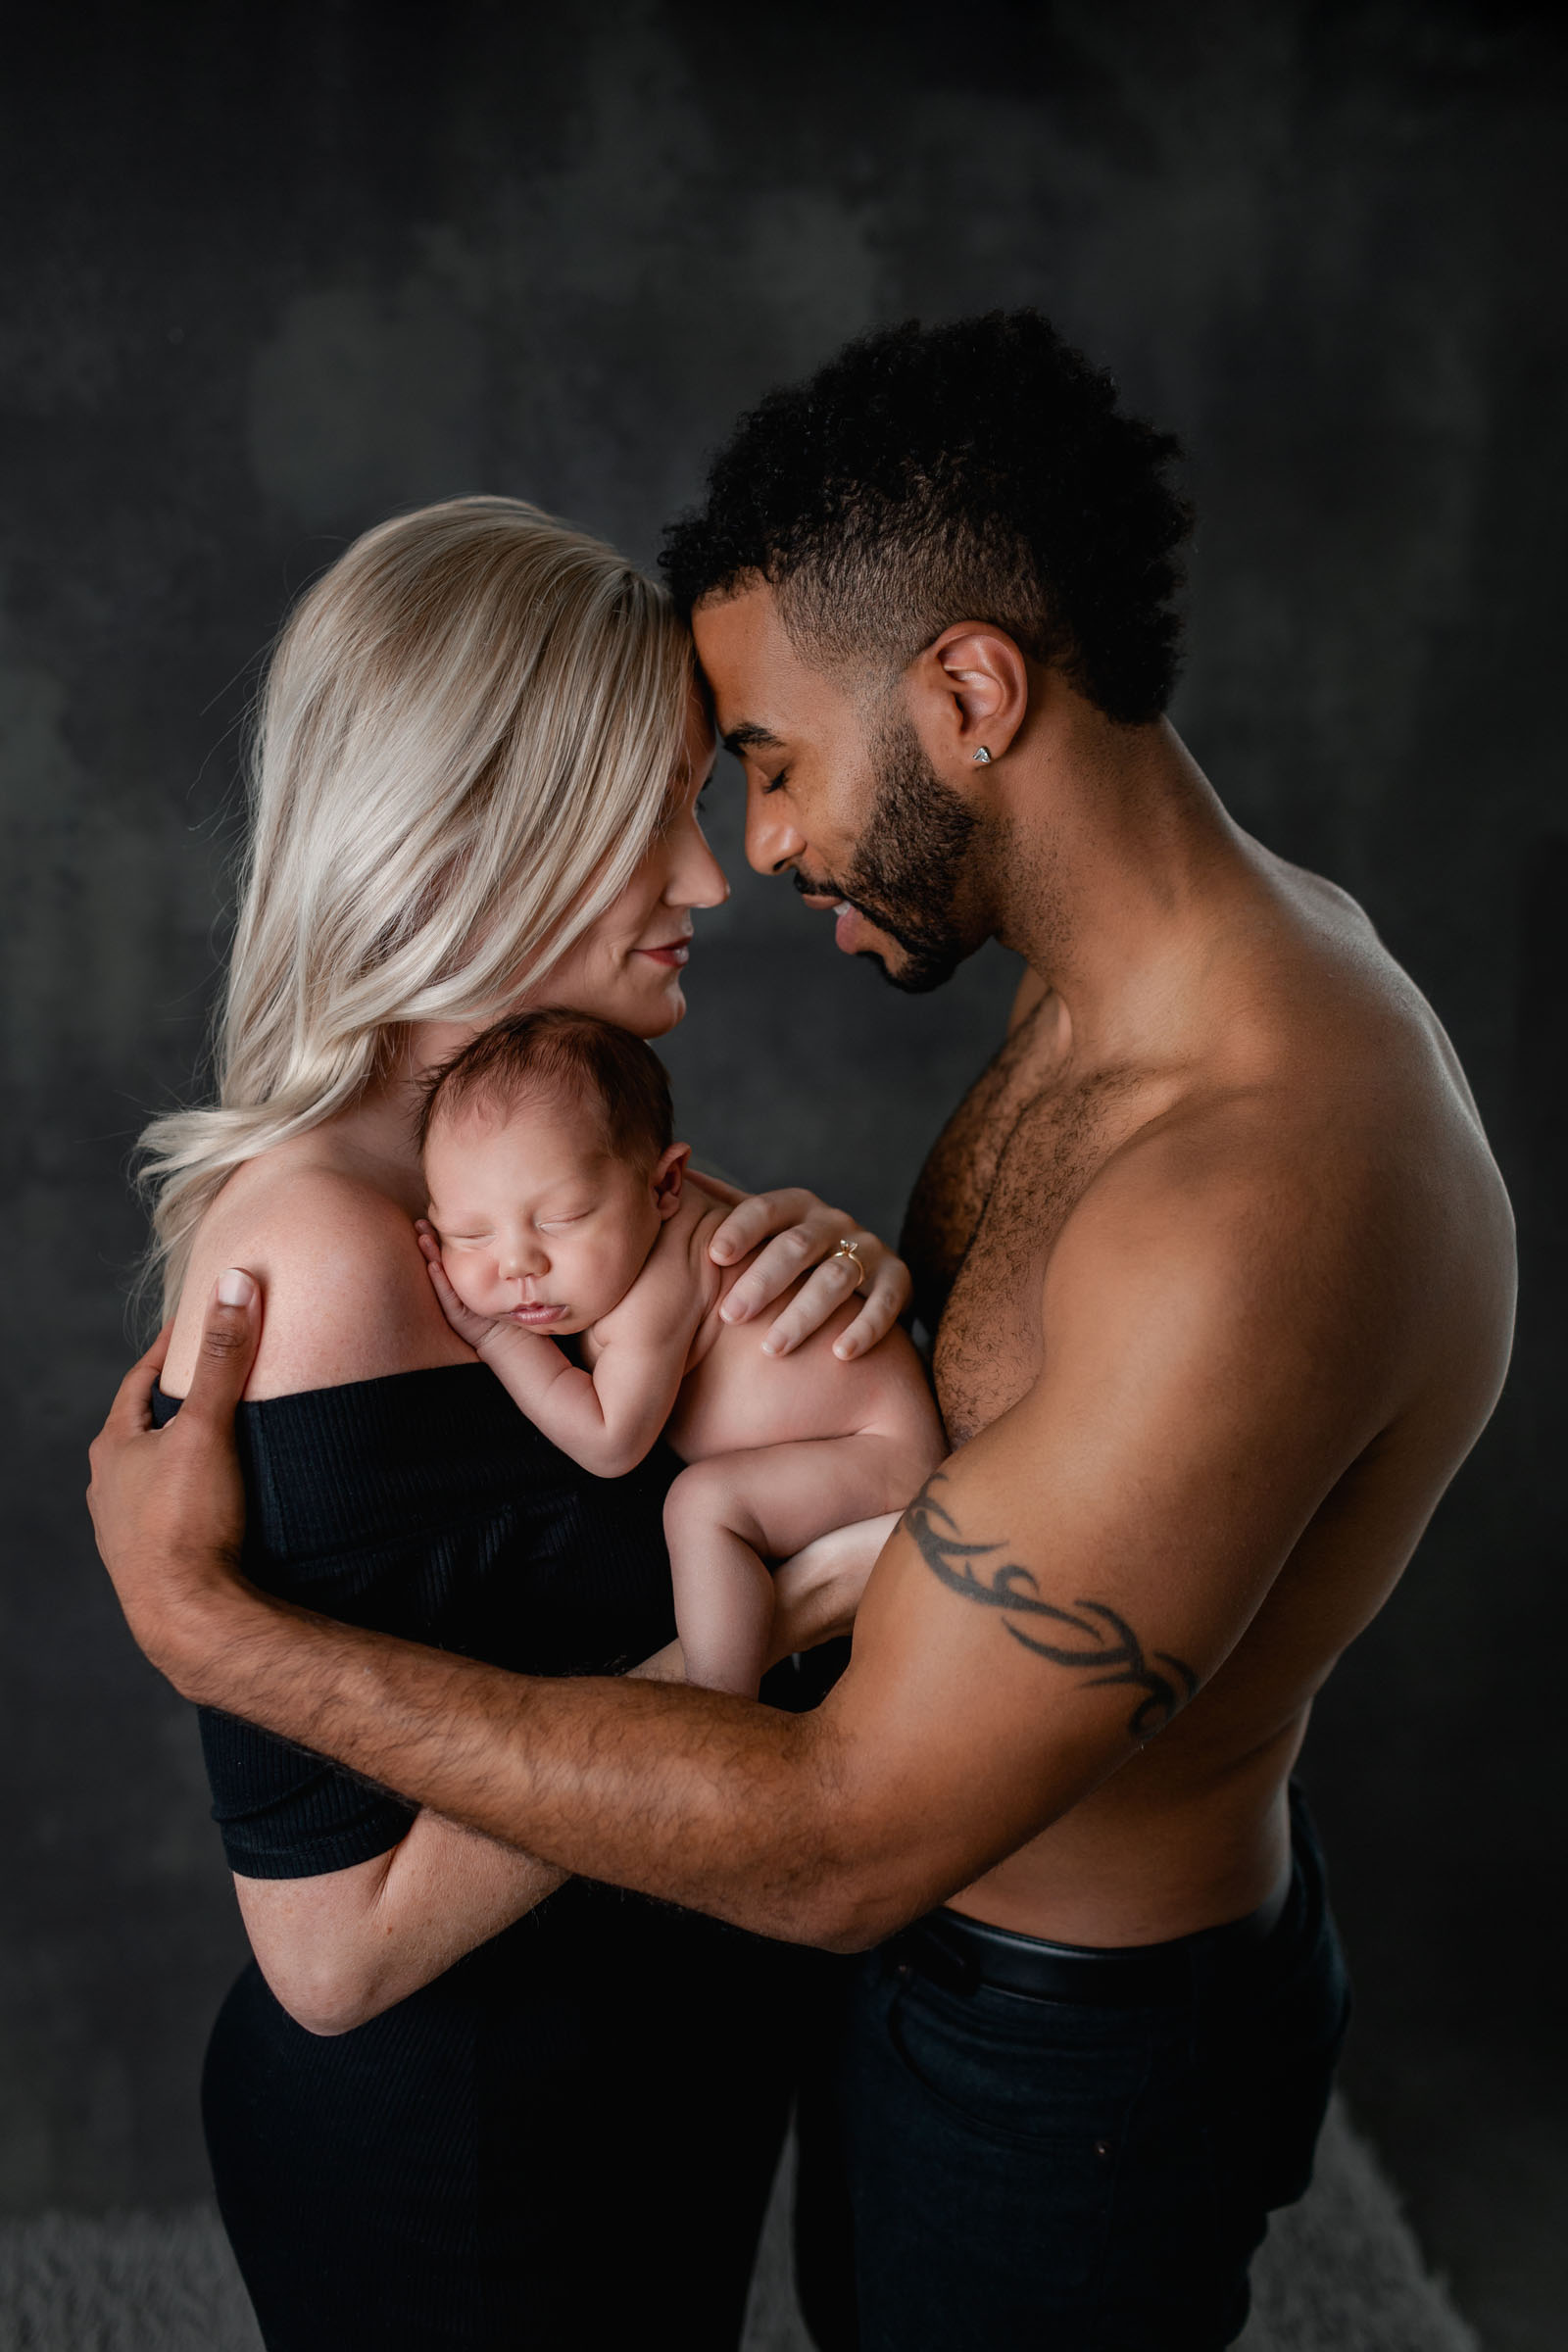 Close family pose of mom and dad during newborn photoshoot with baby between them